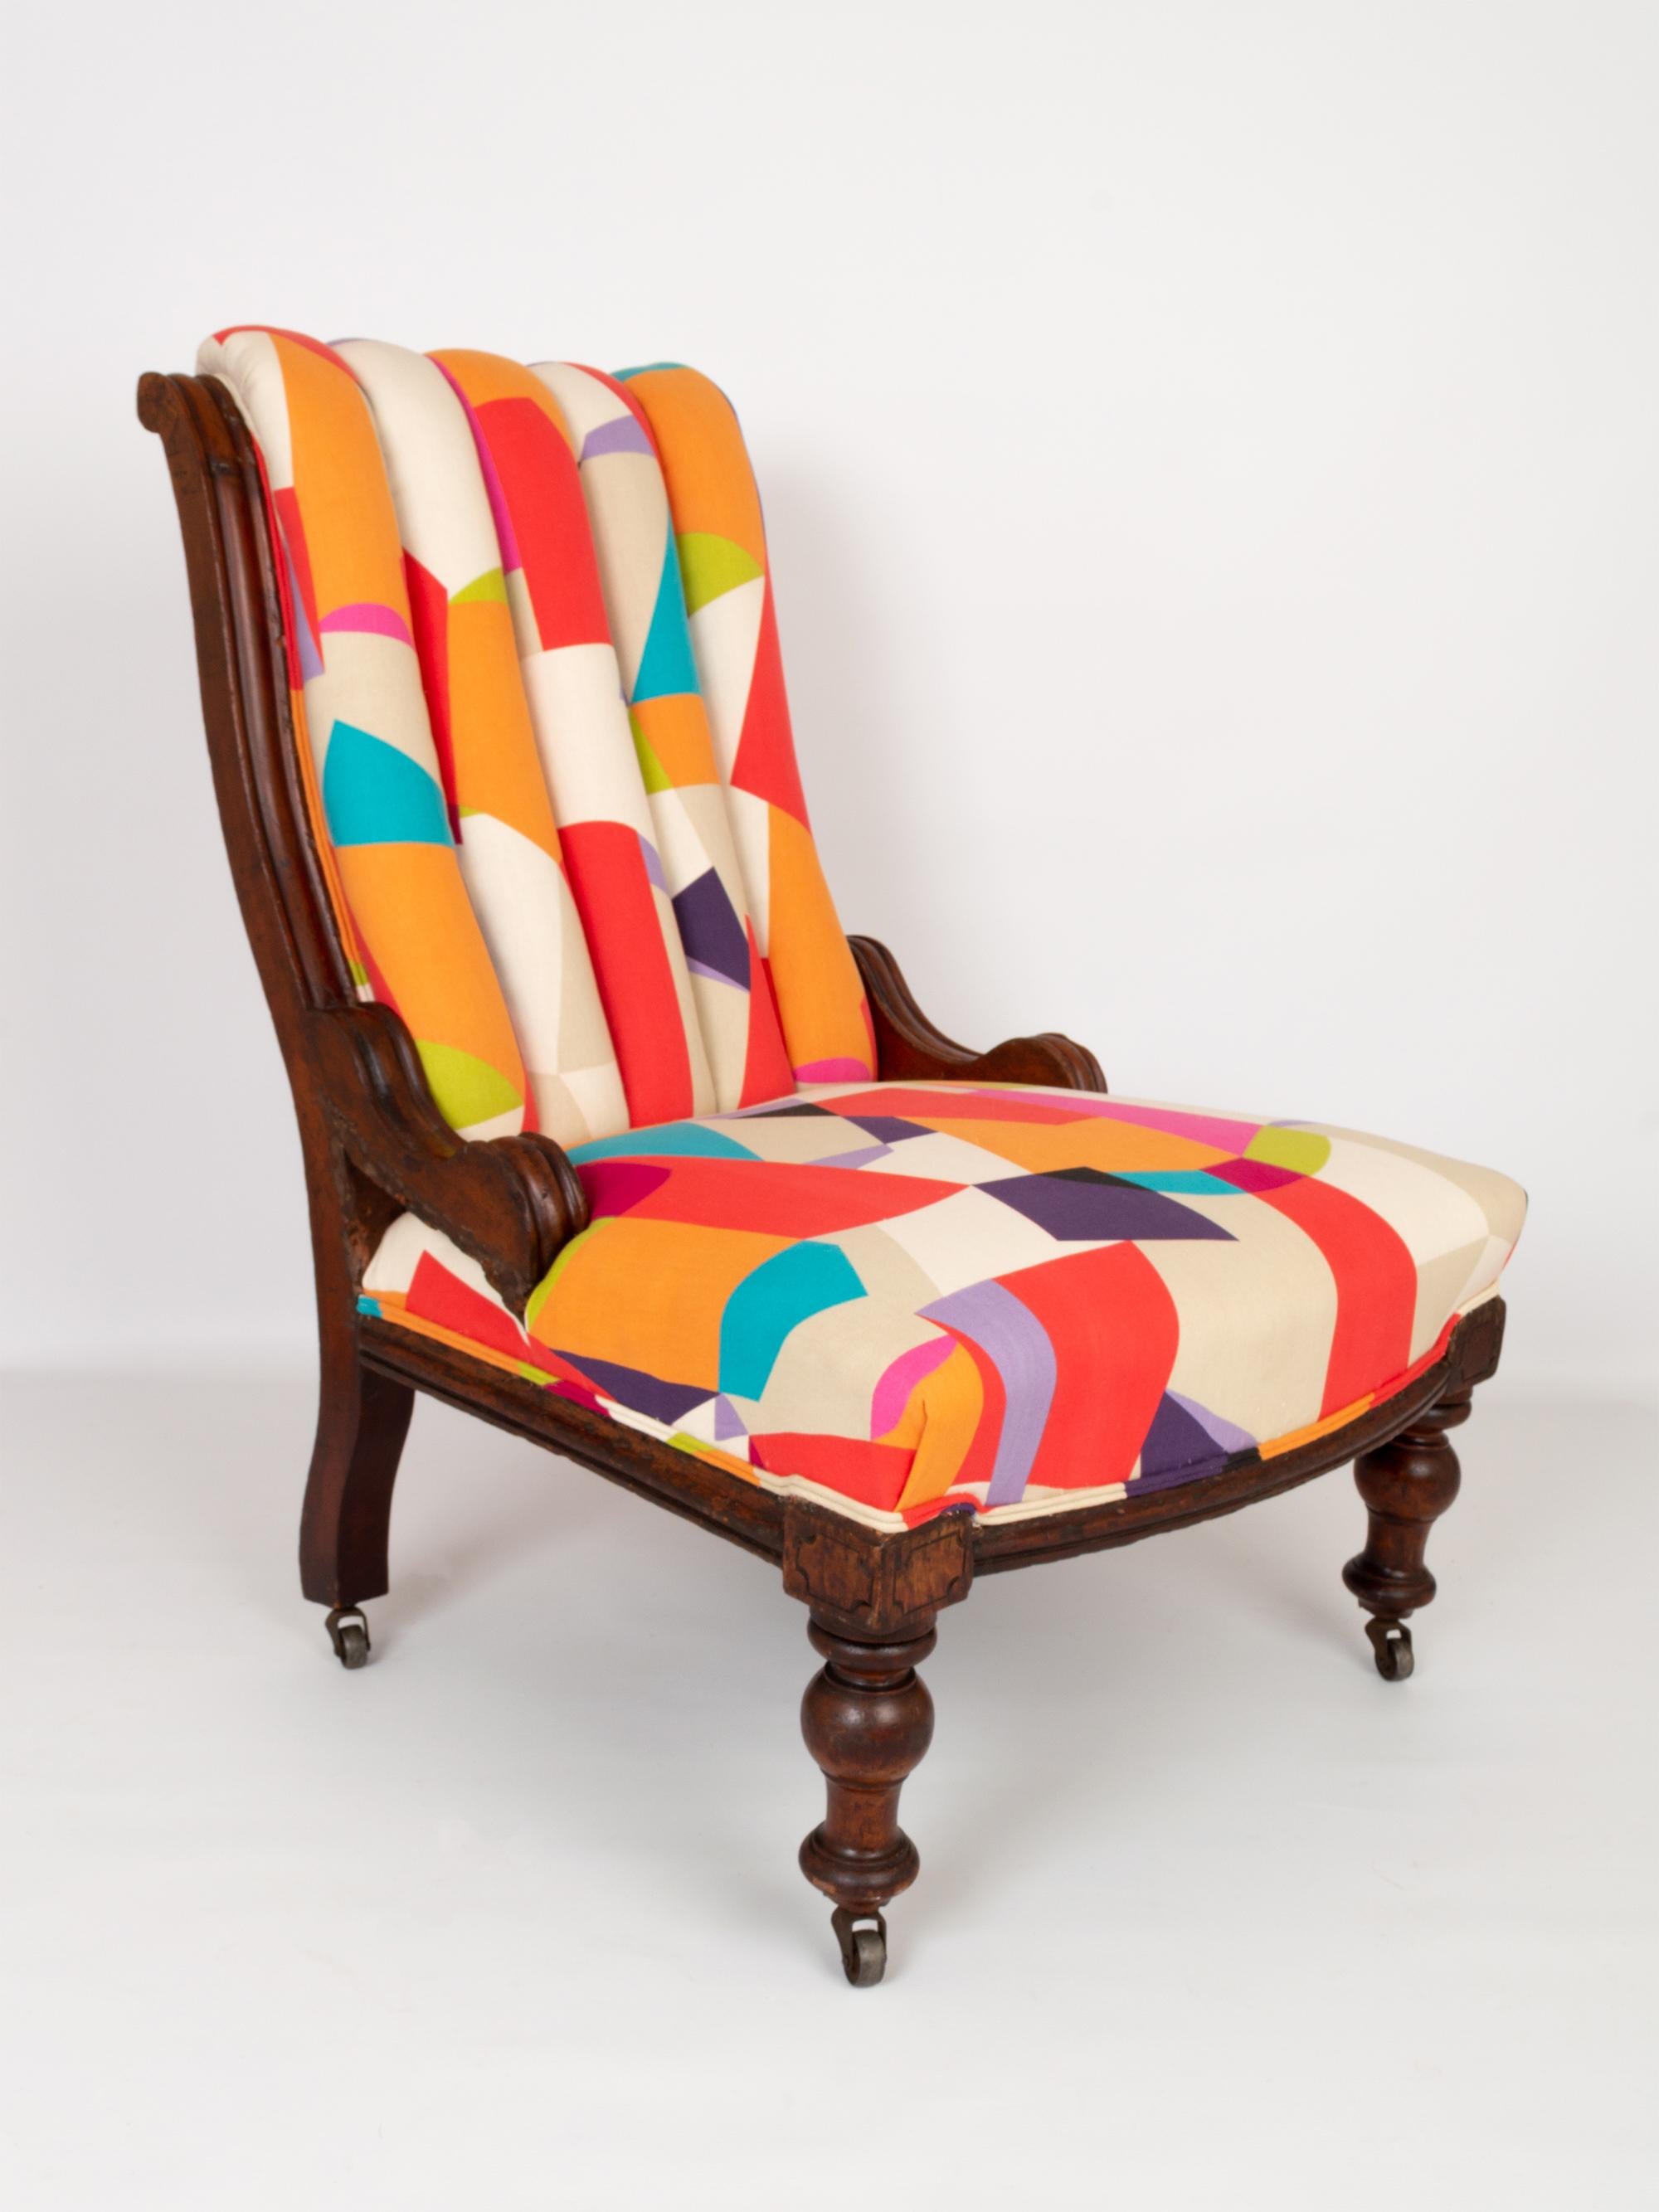 A superb English antique Victorian mahogany framed reading armchair dating from C.1880. Traditionally upholstered and covered in a vibrant and stunningly juxtaposed Sanderson fabric.